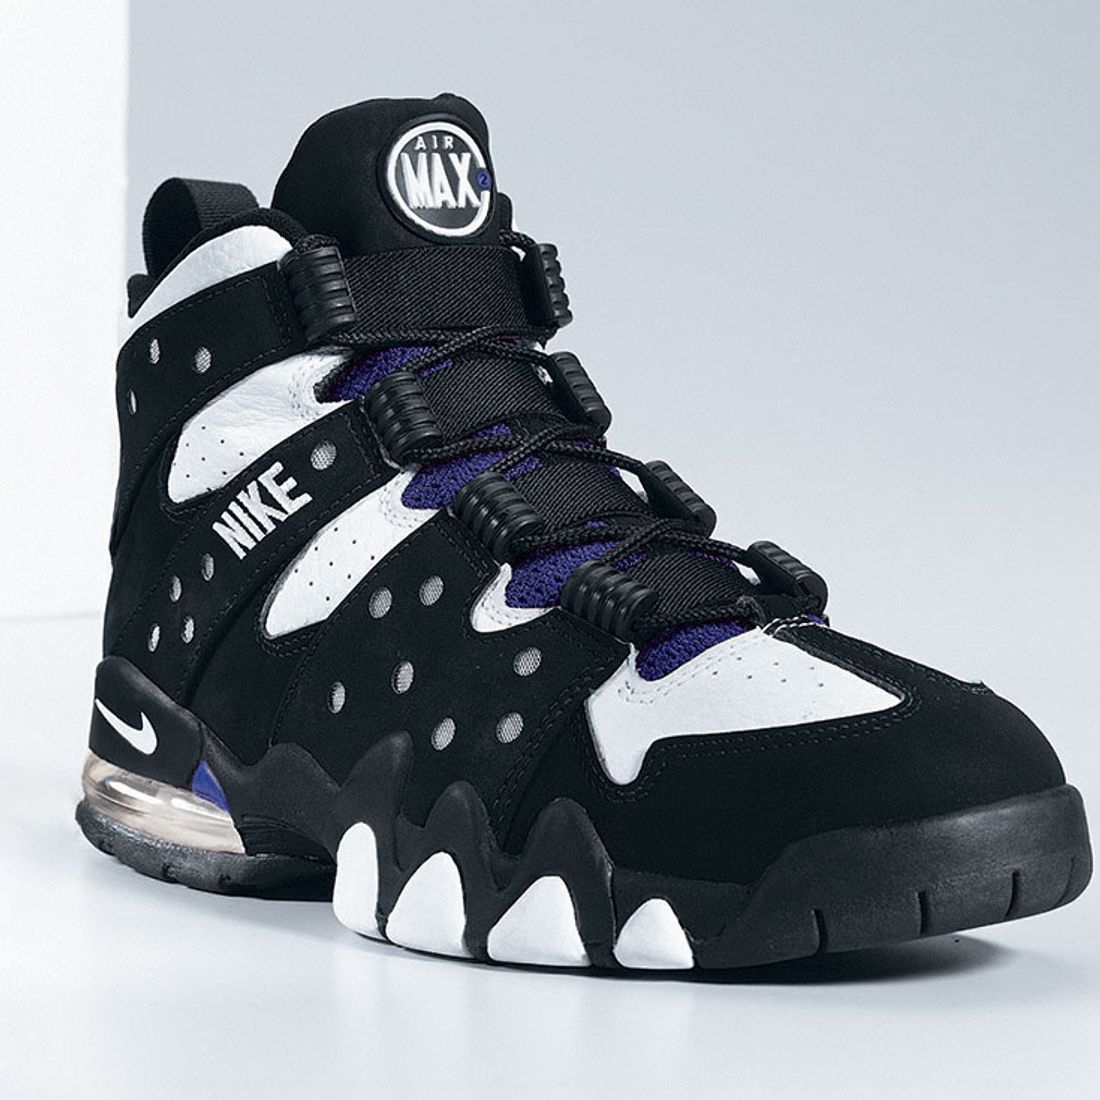 Five Lesser-Known Facts About the Nike Air CB - Sneaker Freaker